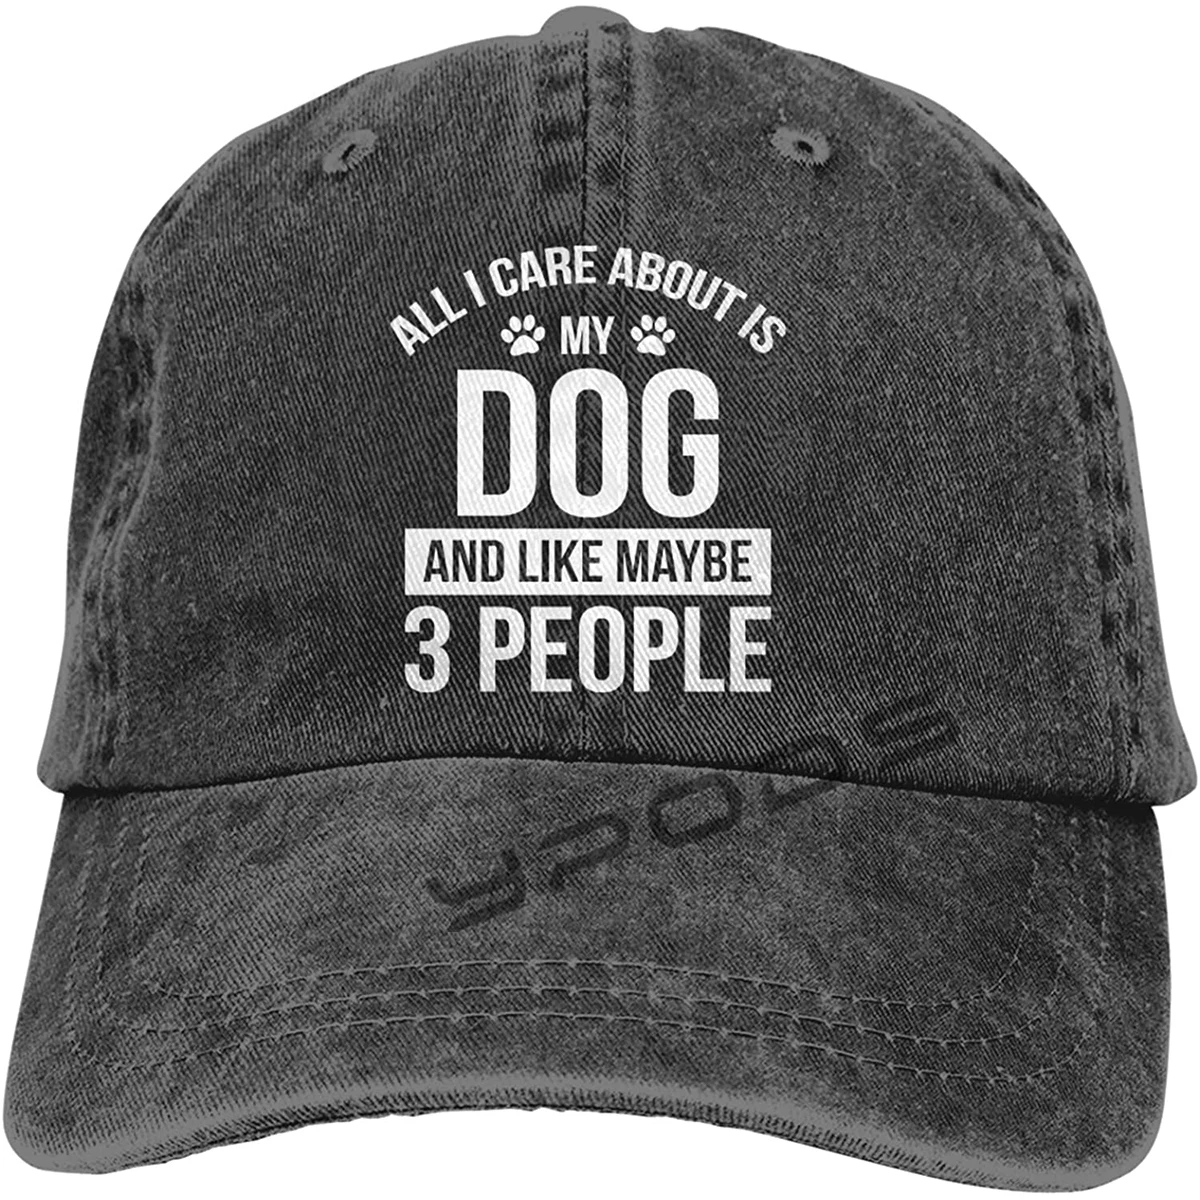 

All I Care About Is My Dog And Like Maybe 3 People Baseball Cap, Adjustable Washed Classic Vintage Denim Hat